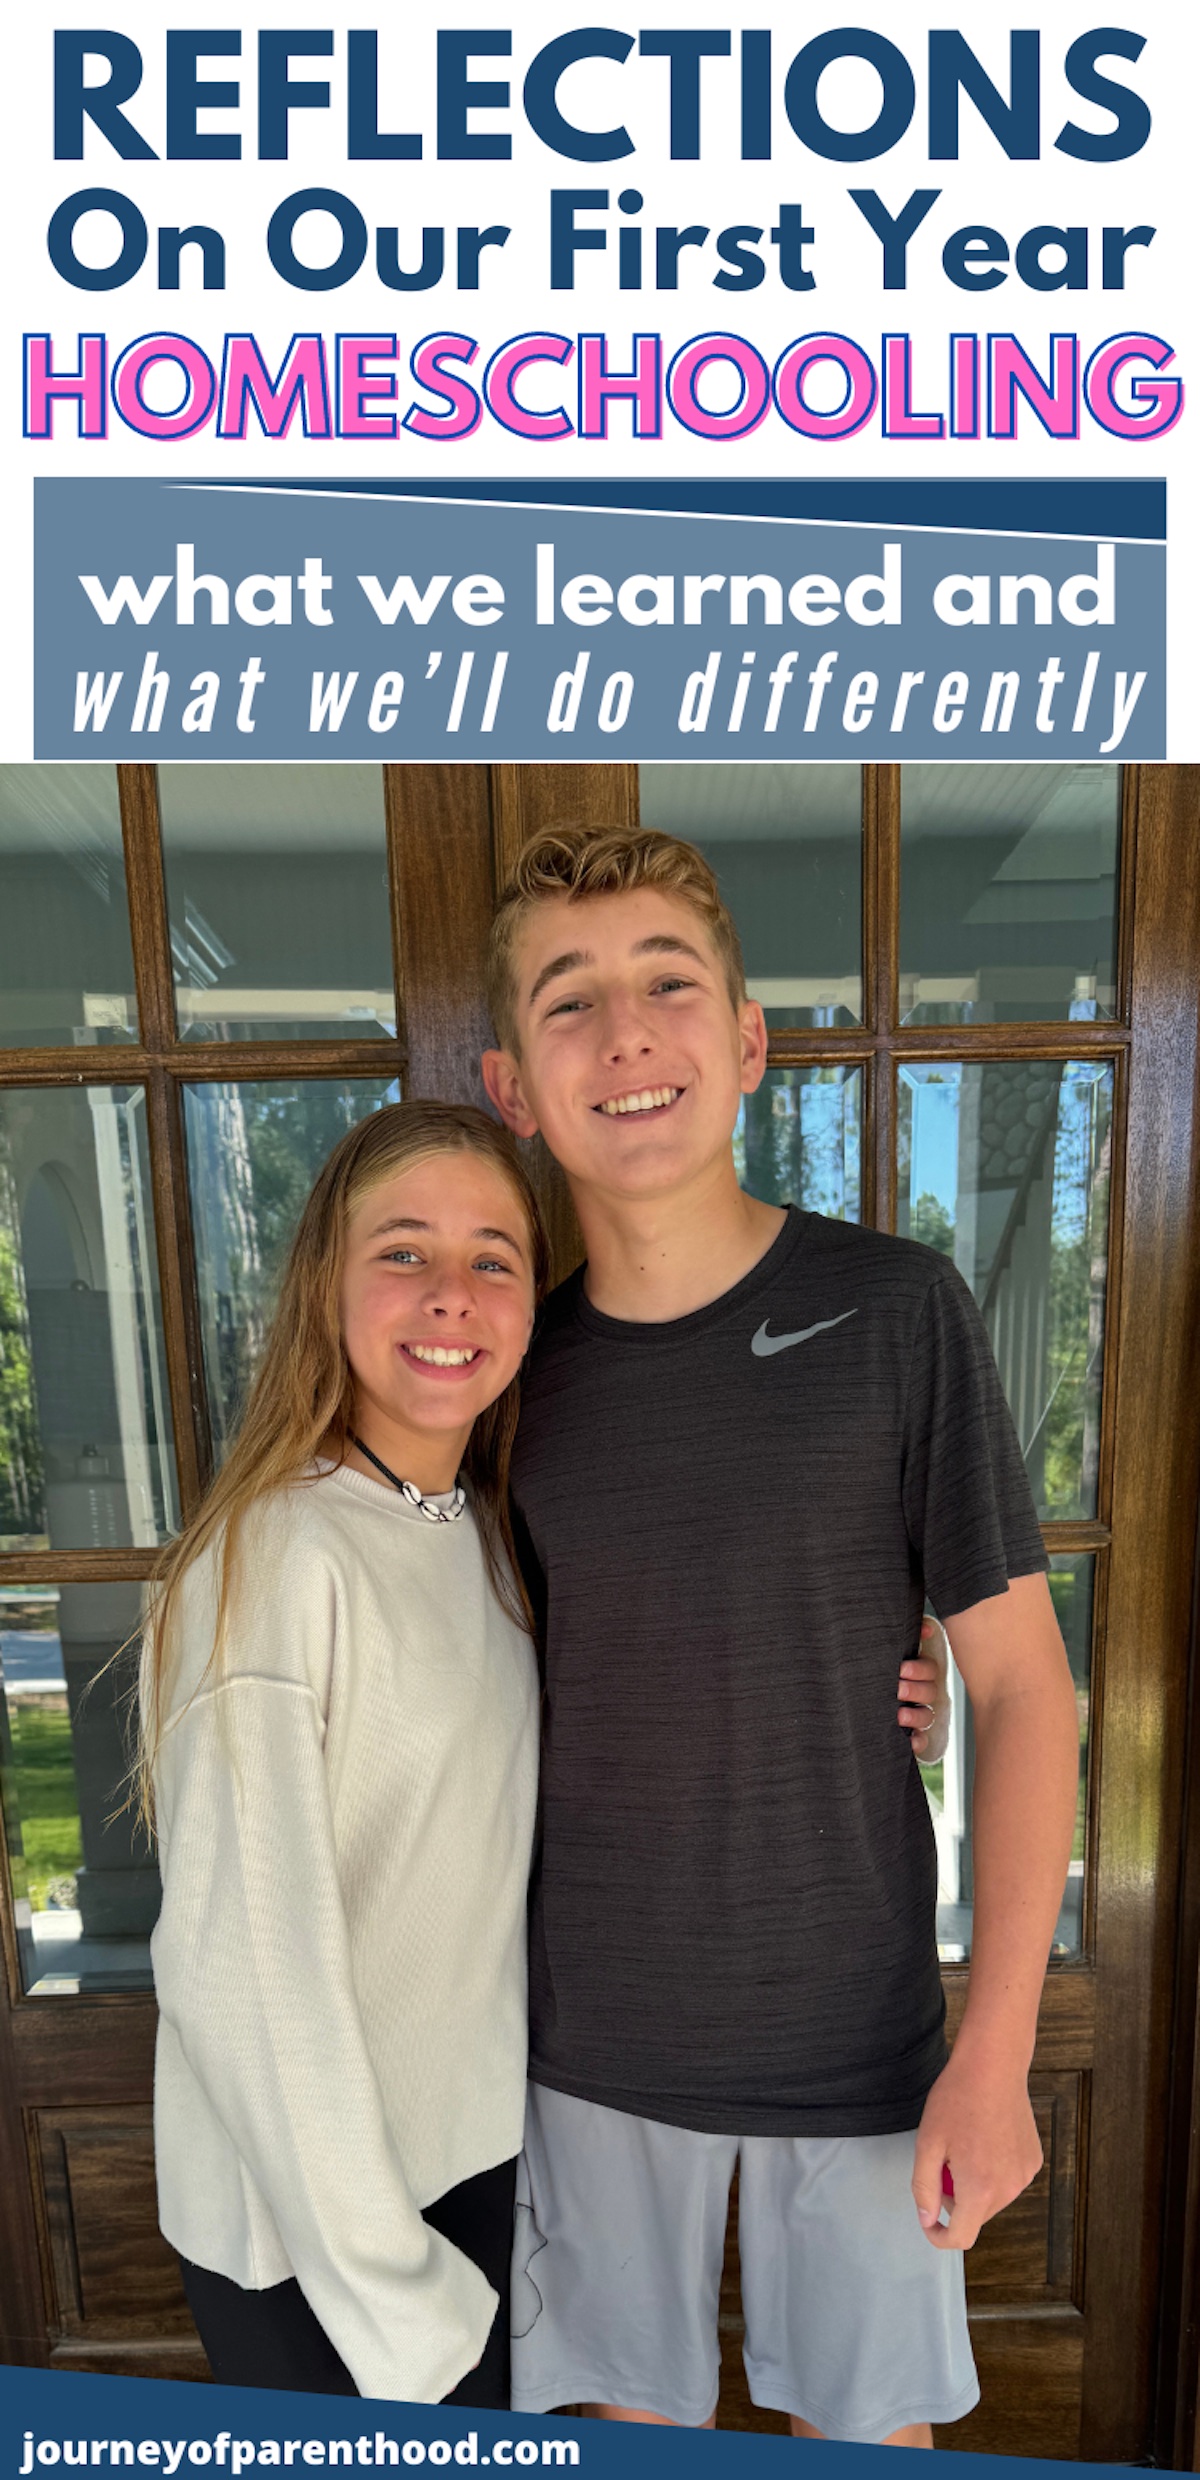 Reflections on our first year homeschooling - homeschool for 6th grade and homeschool for 9th grade. What we love, what we'll change, and what I'd do differently!